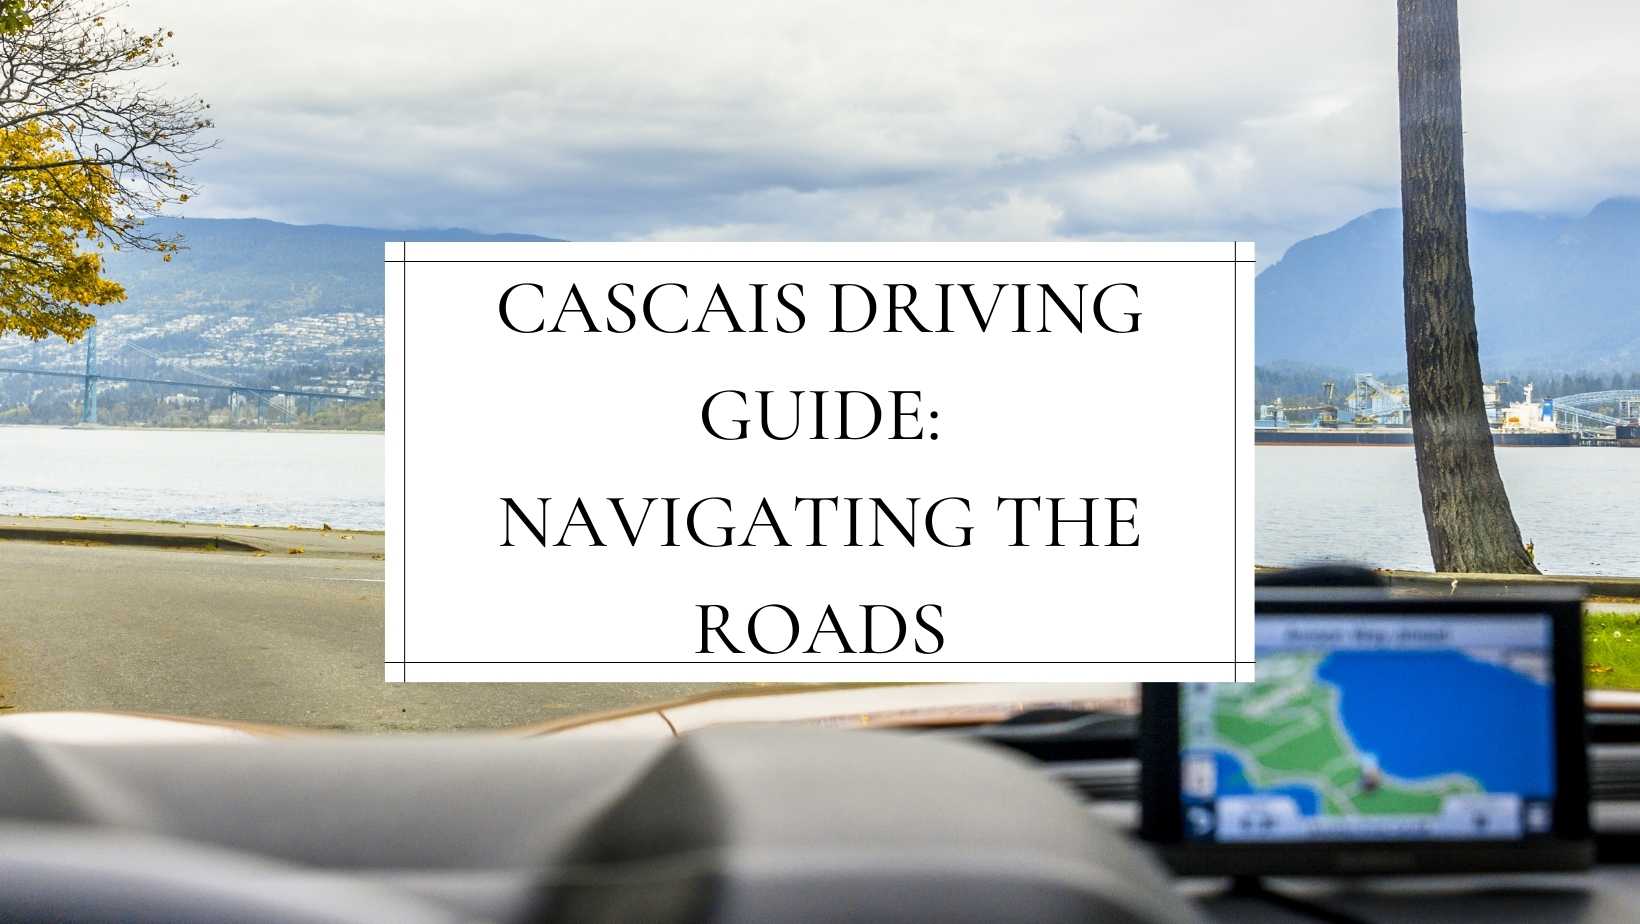 Cascais Driving Guide Navigating the Roads